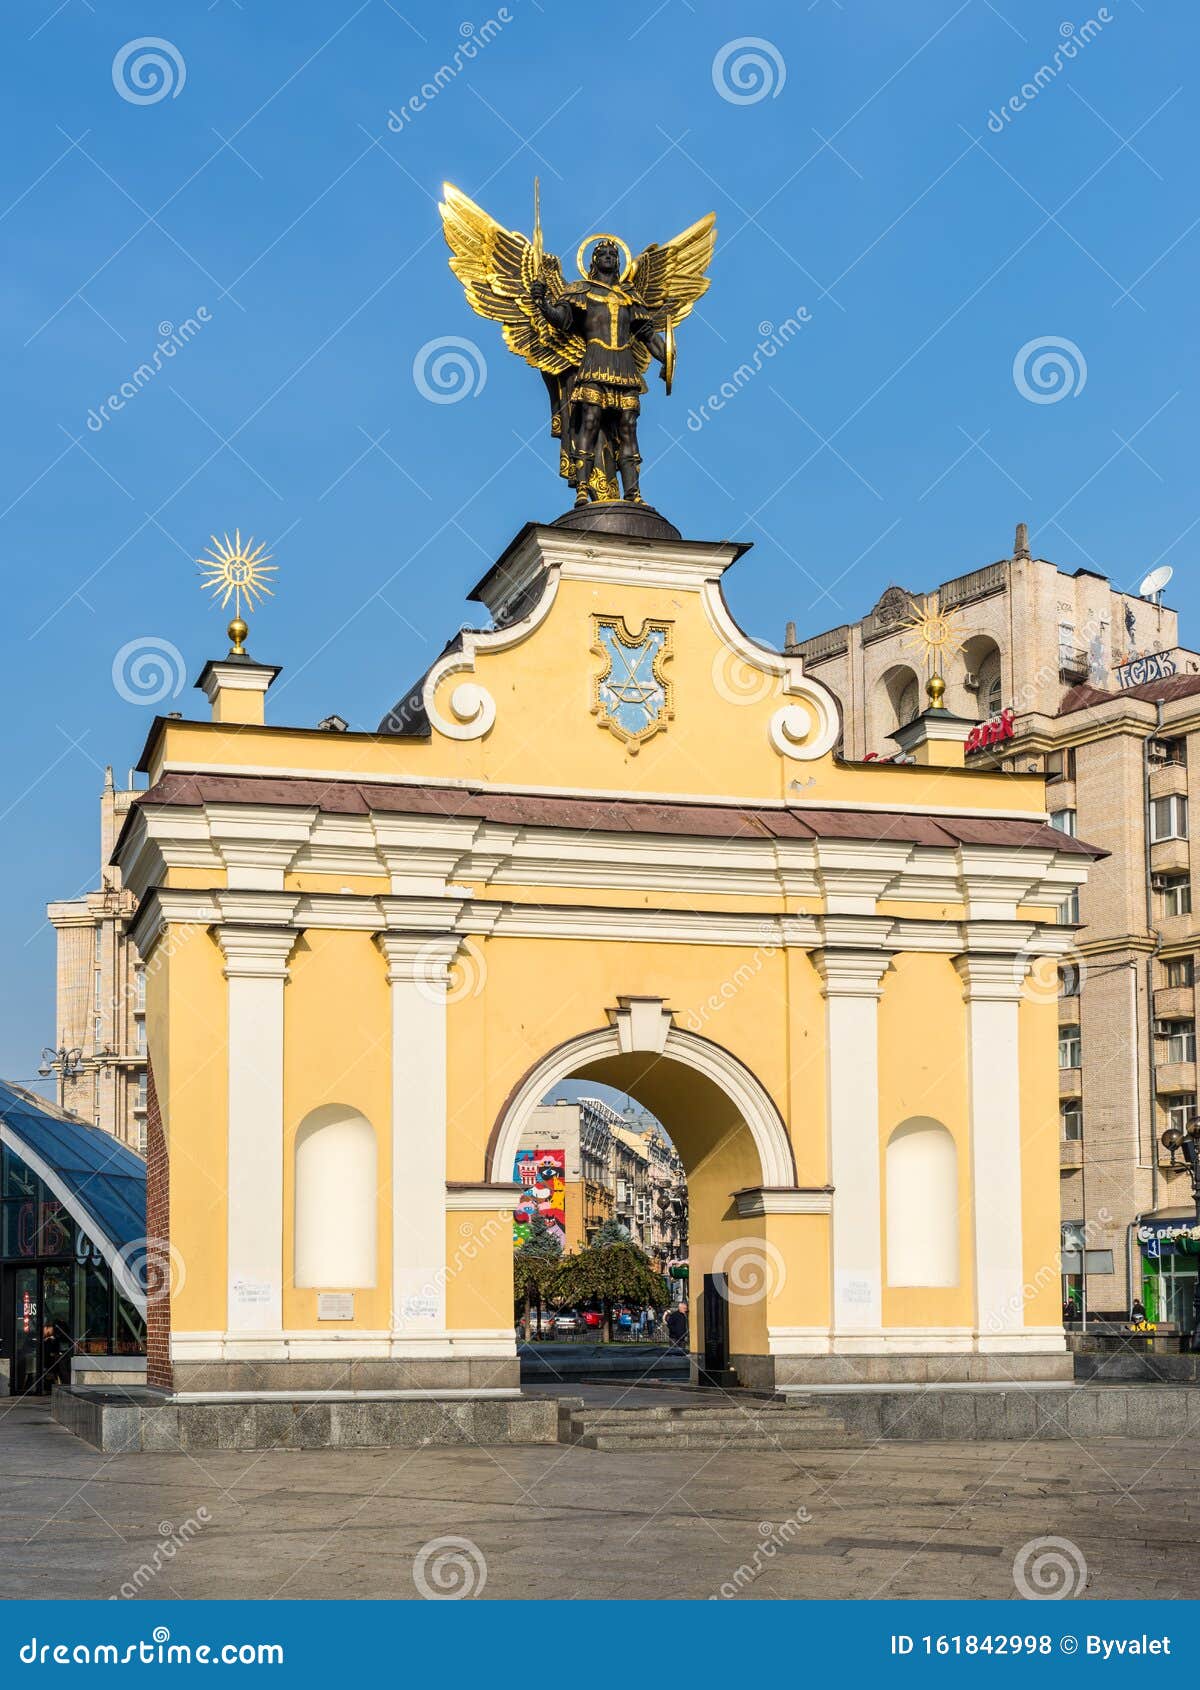 Independence Square Maidan Nezalezhnosti with Lyadsky Gate and Gold plated bronze statue of Archangel Michael